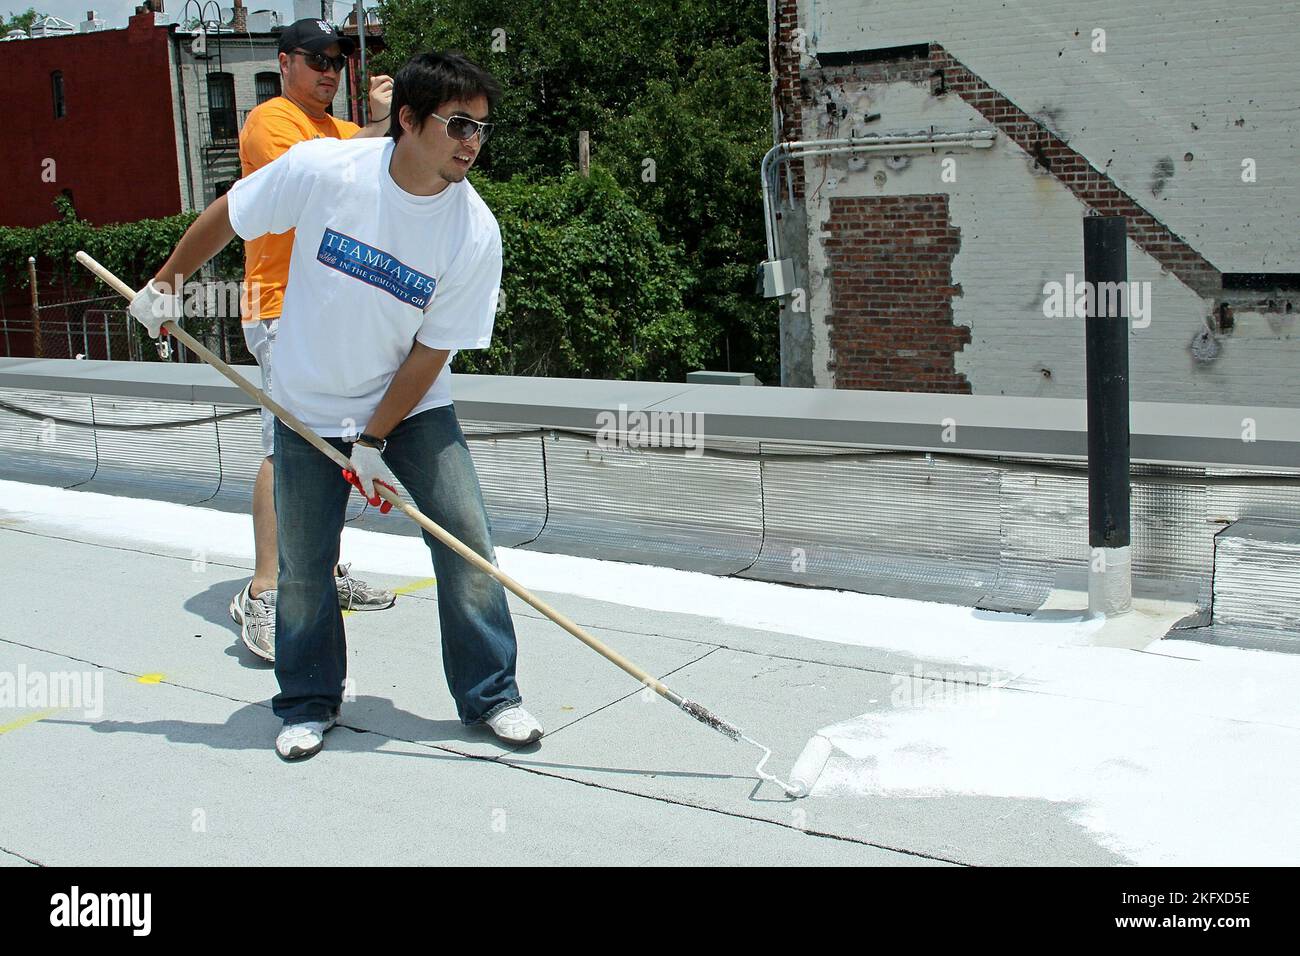 Brooklyn, NY, USA. 23 June, 2010. Hisanori Takahashi, of the NY Mets at the Cool The Roof Project at the Bedford-Stuyvesant YMCA. Credit: Steve Mack/Alamy Stock Photo